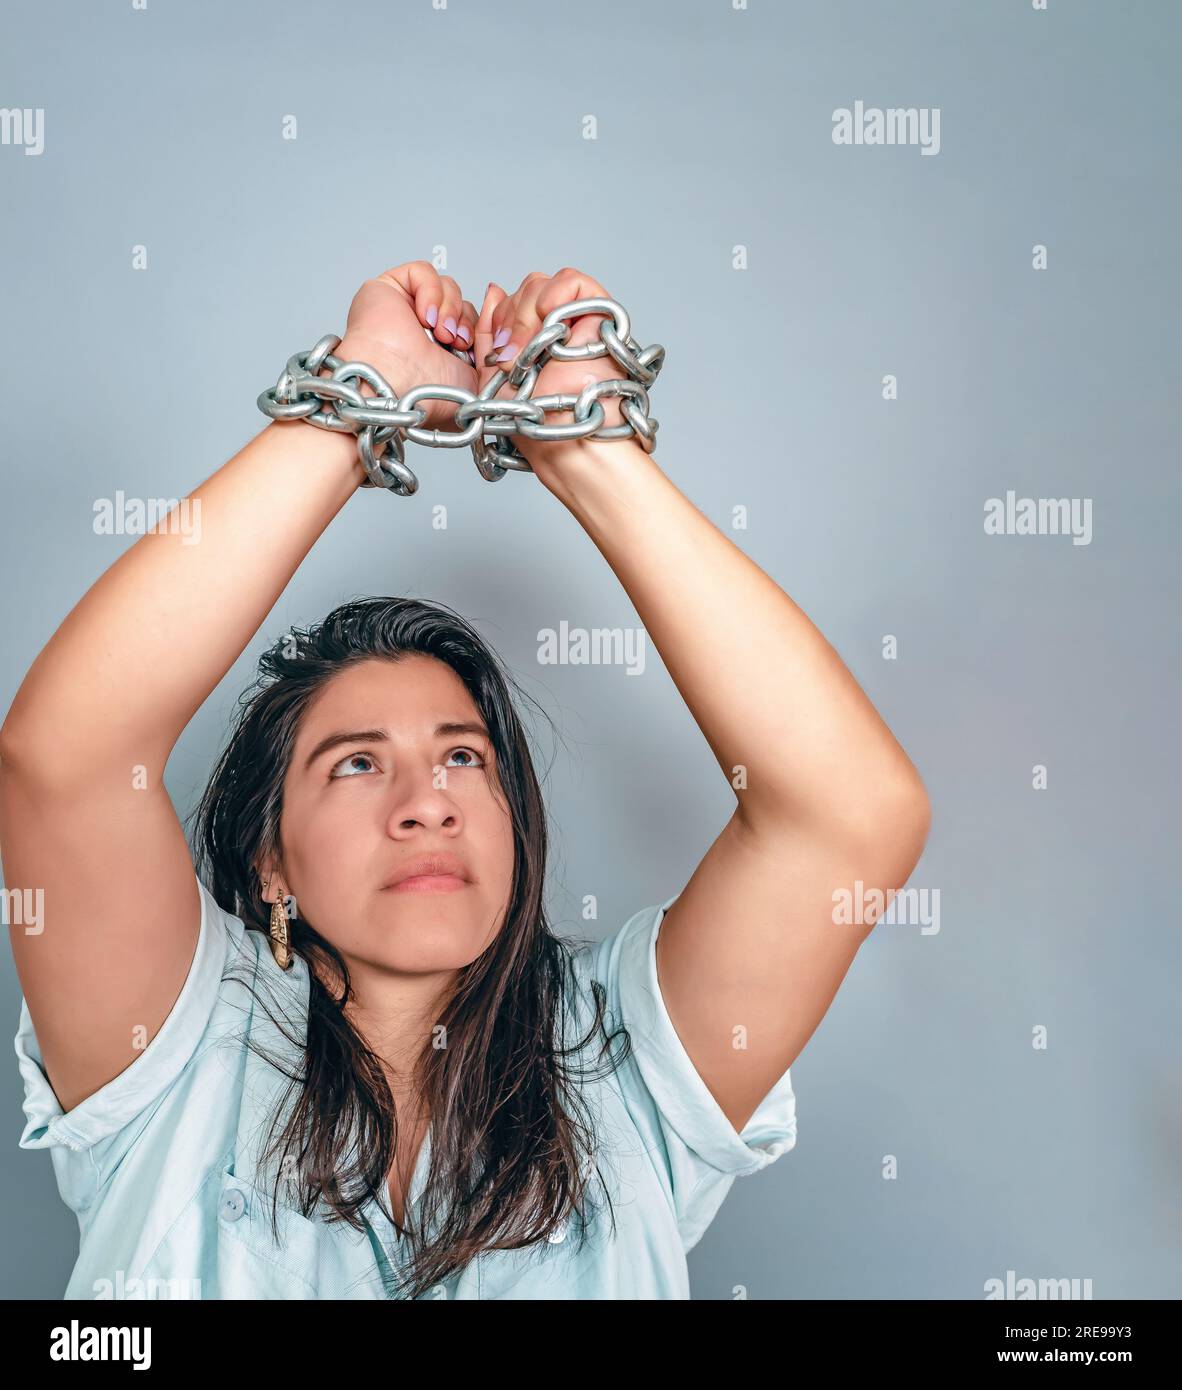 Woman In Chains 